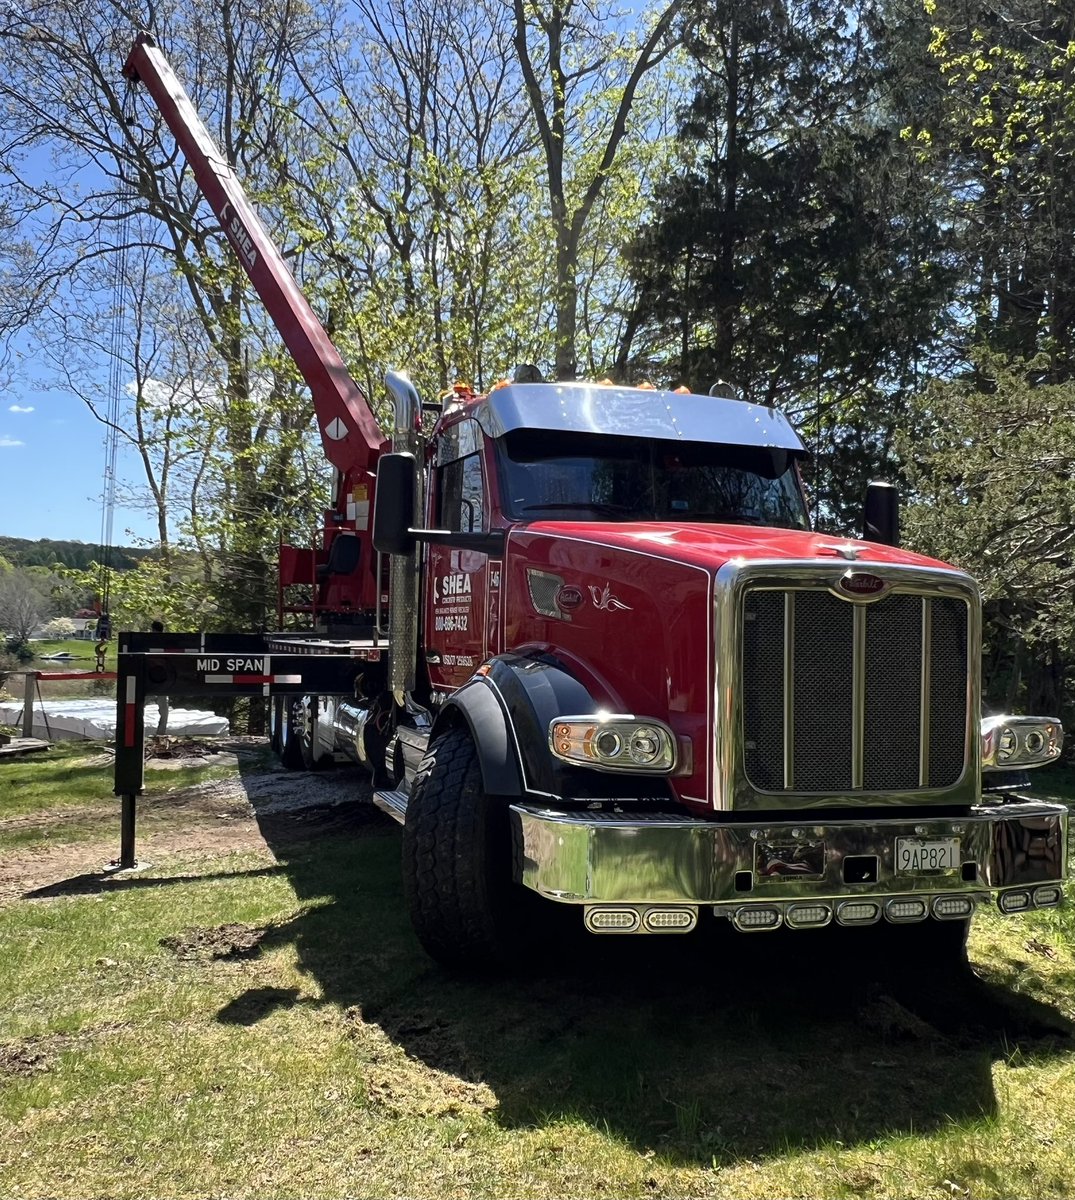 Soaking up the sun ☀️ … Our @PeterbiltMotors “Power Fleet” is delivering value throughout New England & beyond 🇺🇸 … Teamwork makes the dream work #may2024 #precastconcrete #thesheaway #peterbilt #qmccranes #madeintheusa🇺🇸 #teamworkmakesthedreamwork